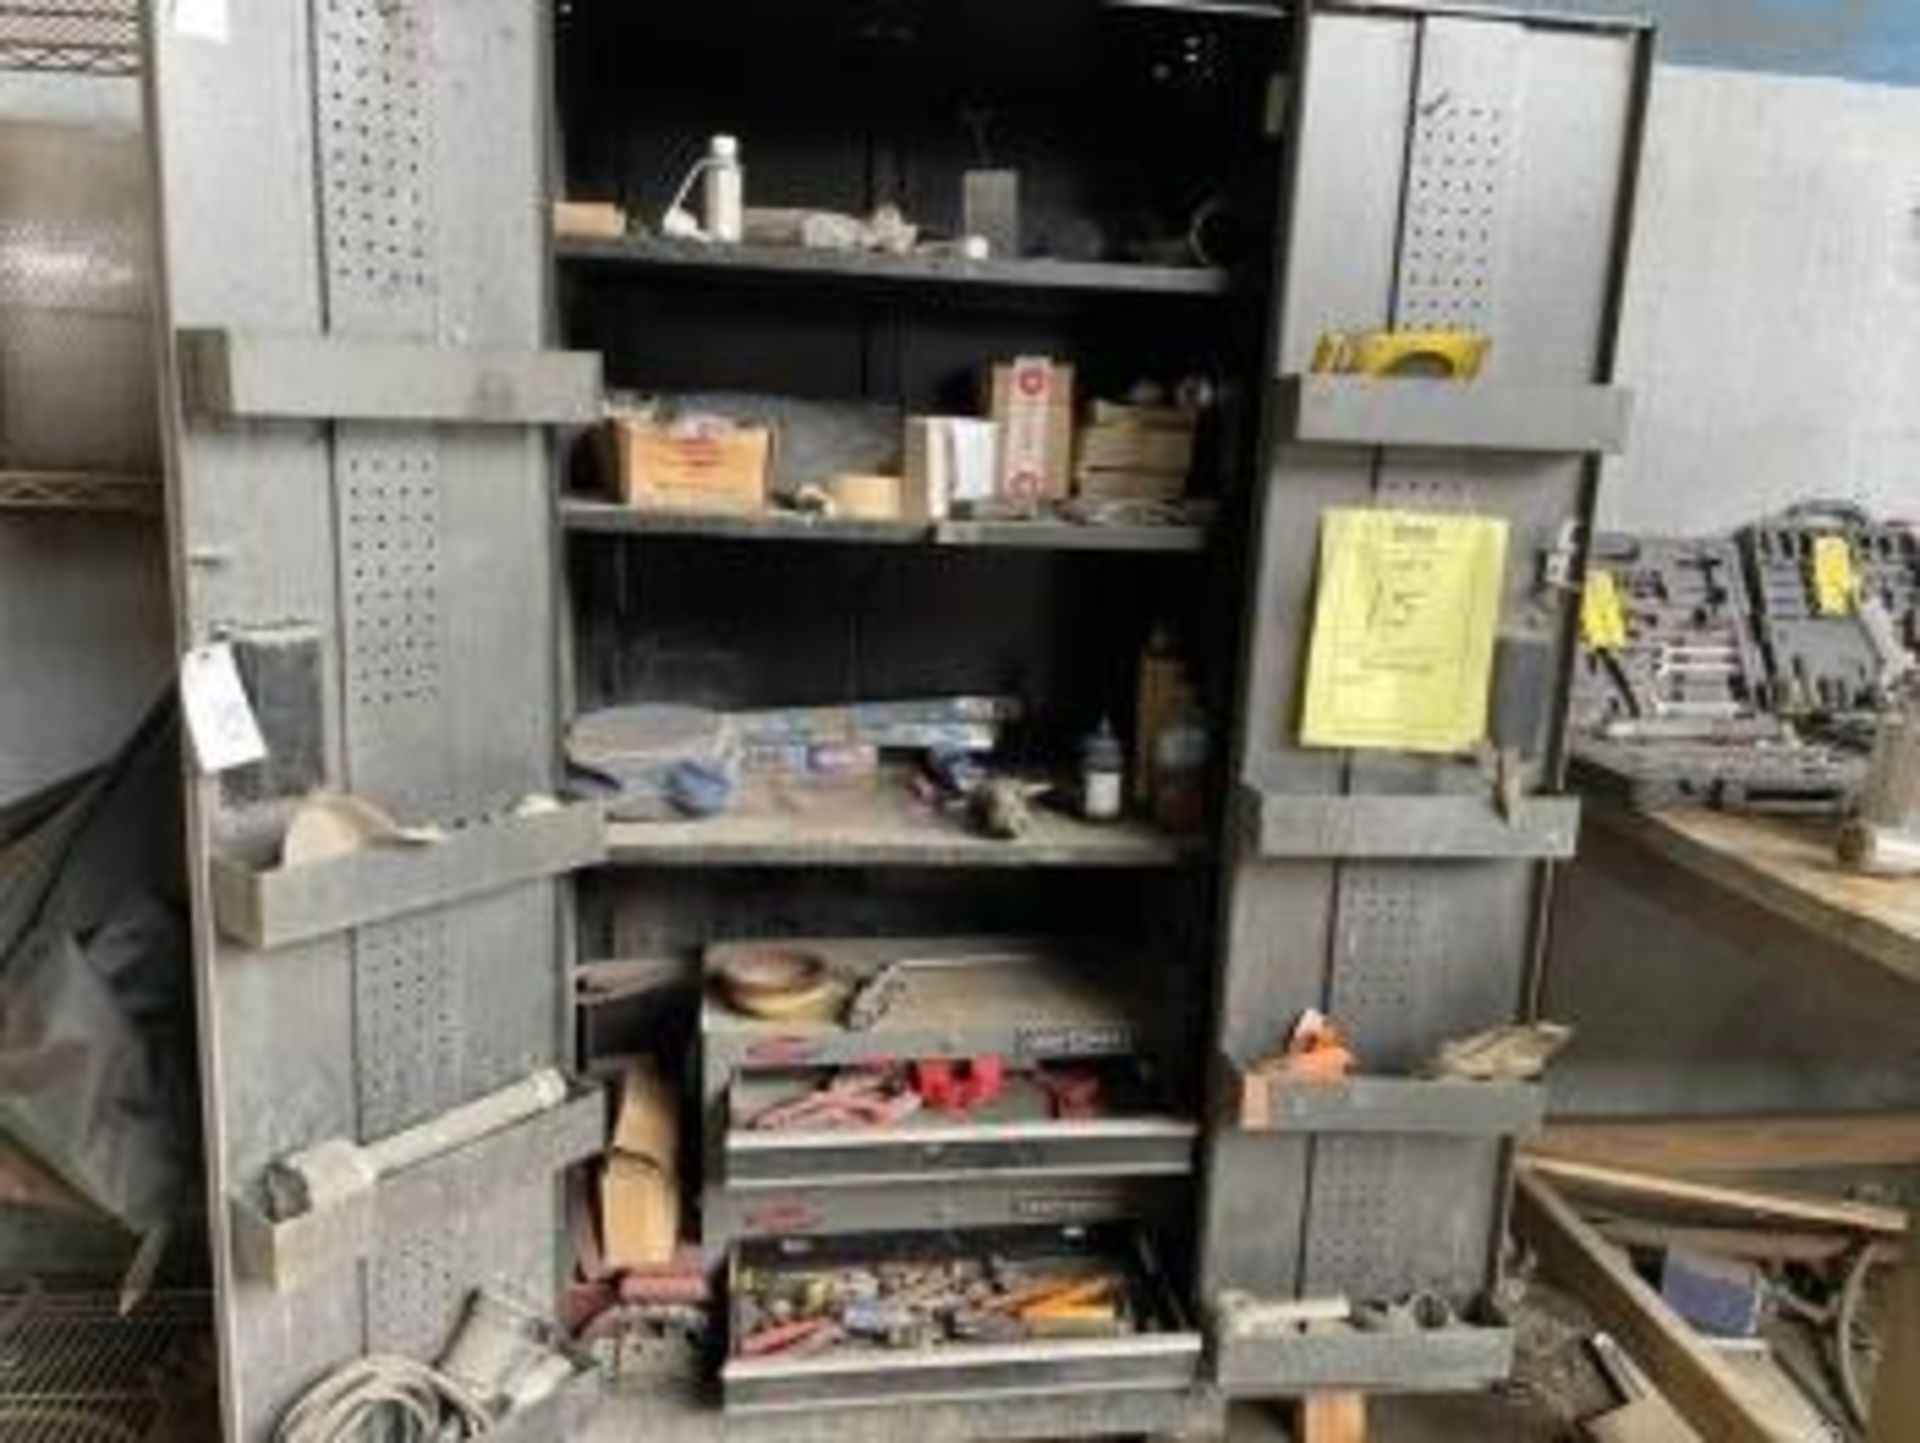 CRAFTSMAN STEEL CABINET WITH 2 CRAFTSMAN TOOL BOXES (MISSING DRAWERS) WITH CONTENTS (TOOLS, ETC) (LO - Image 3 of 4